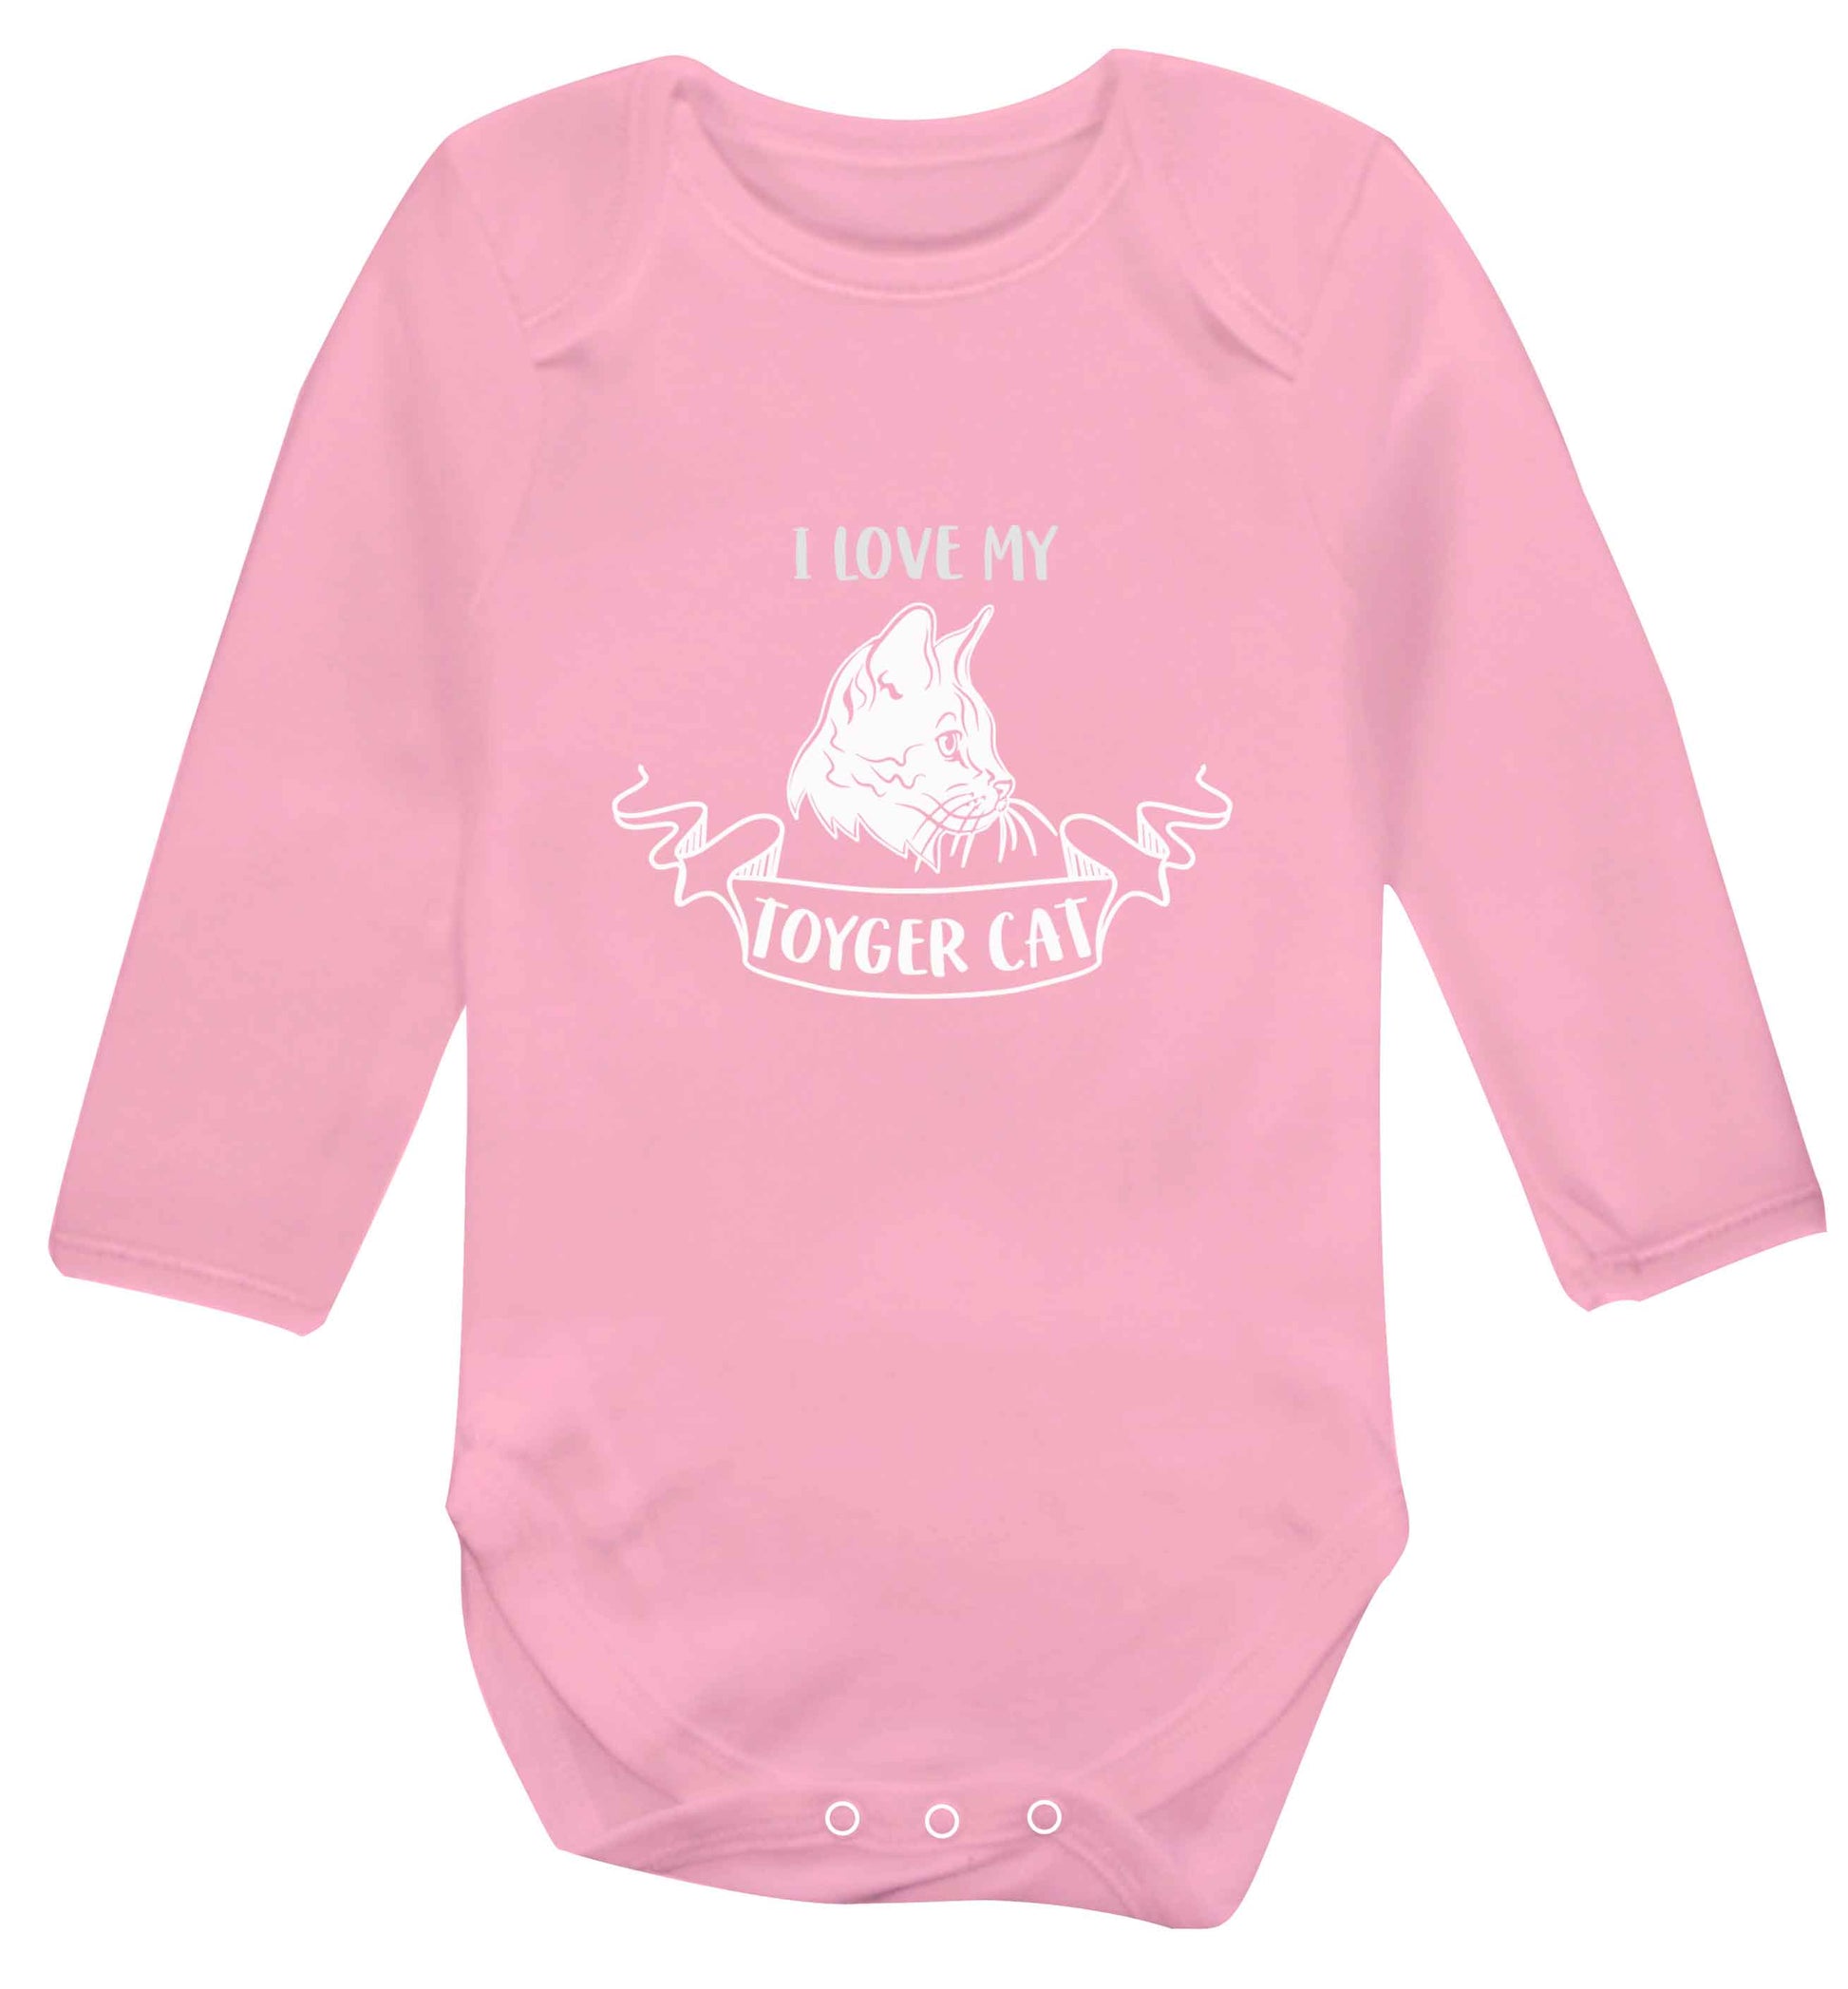 I love my toyger cat baby vest long sleeved pale pink 6-12 months